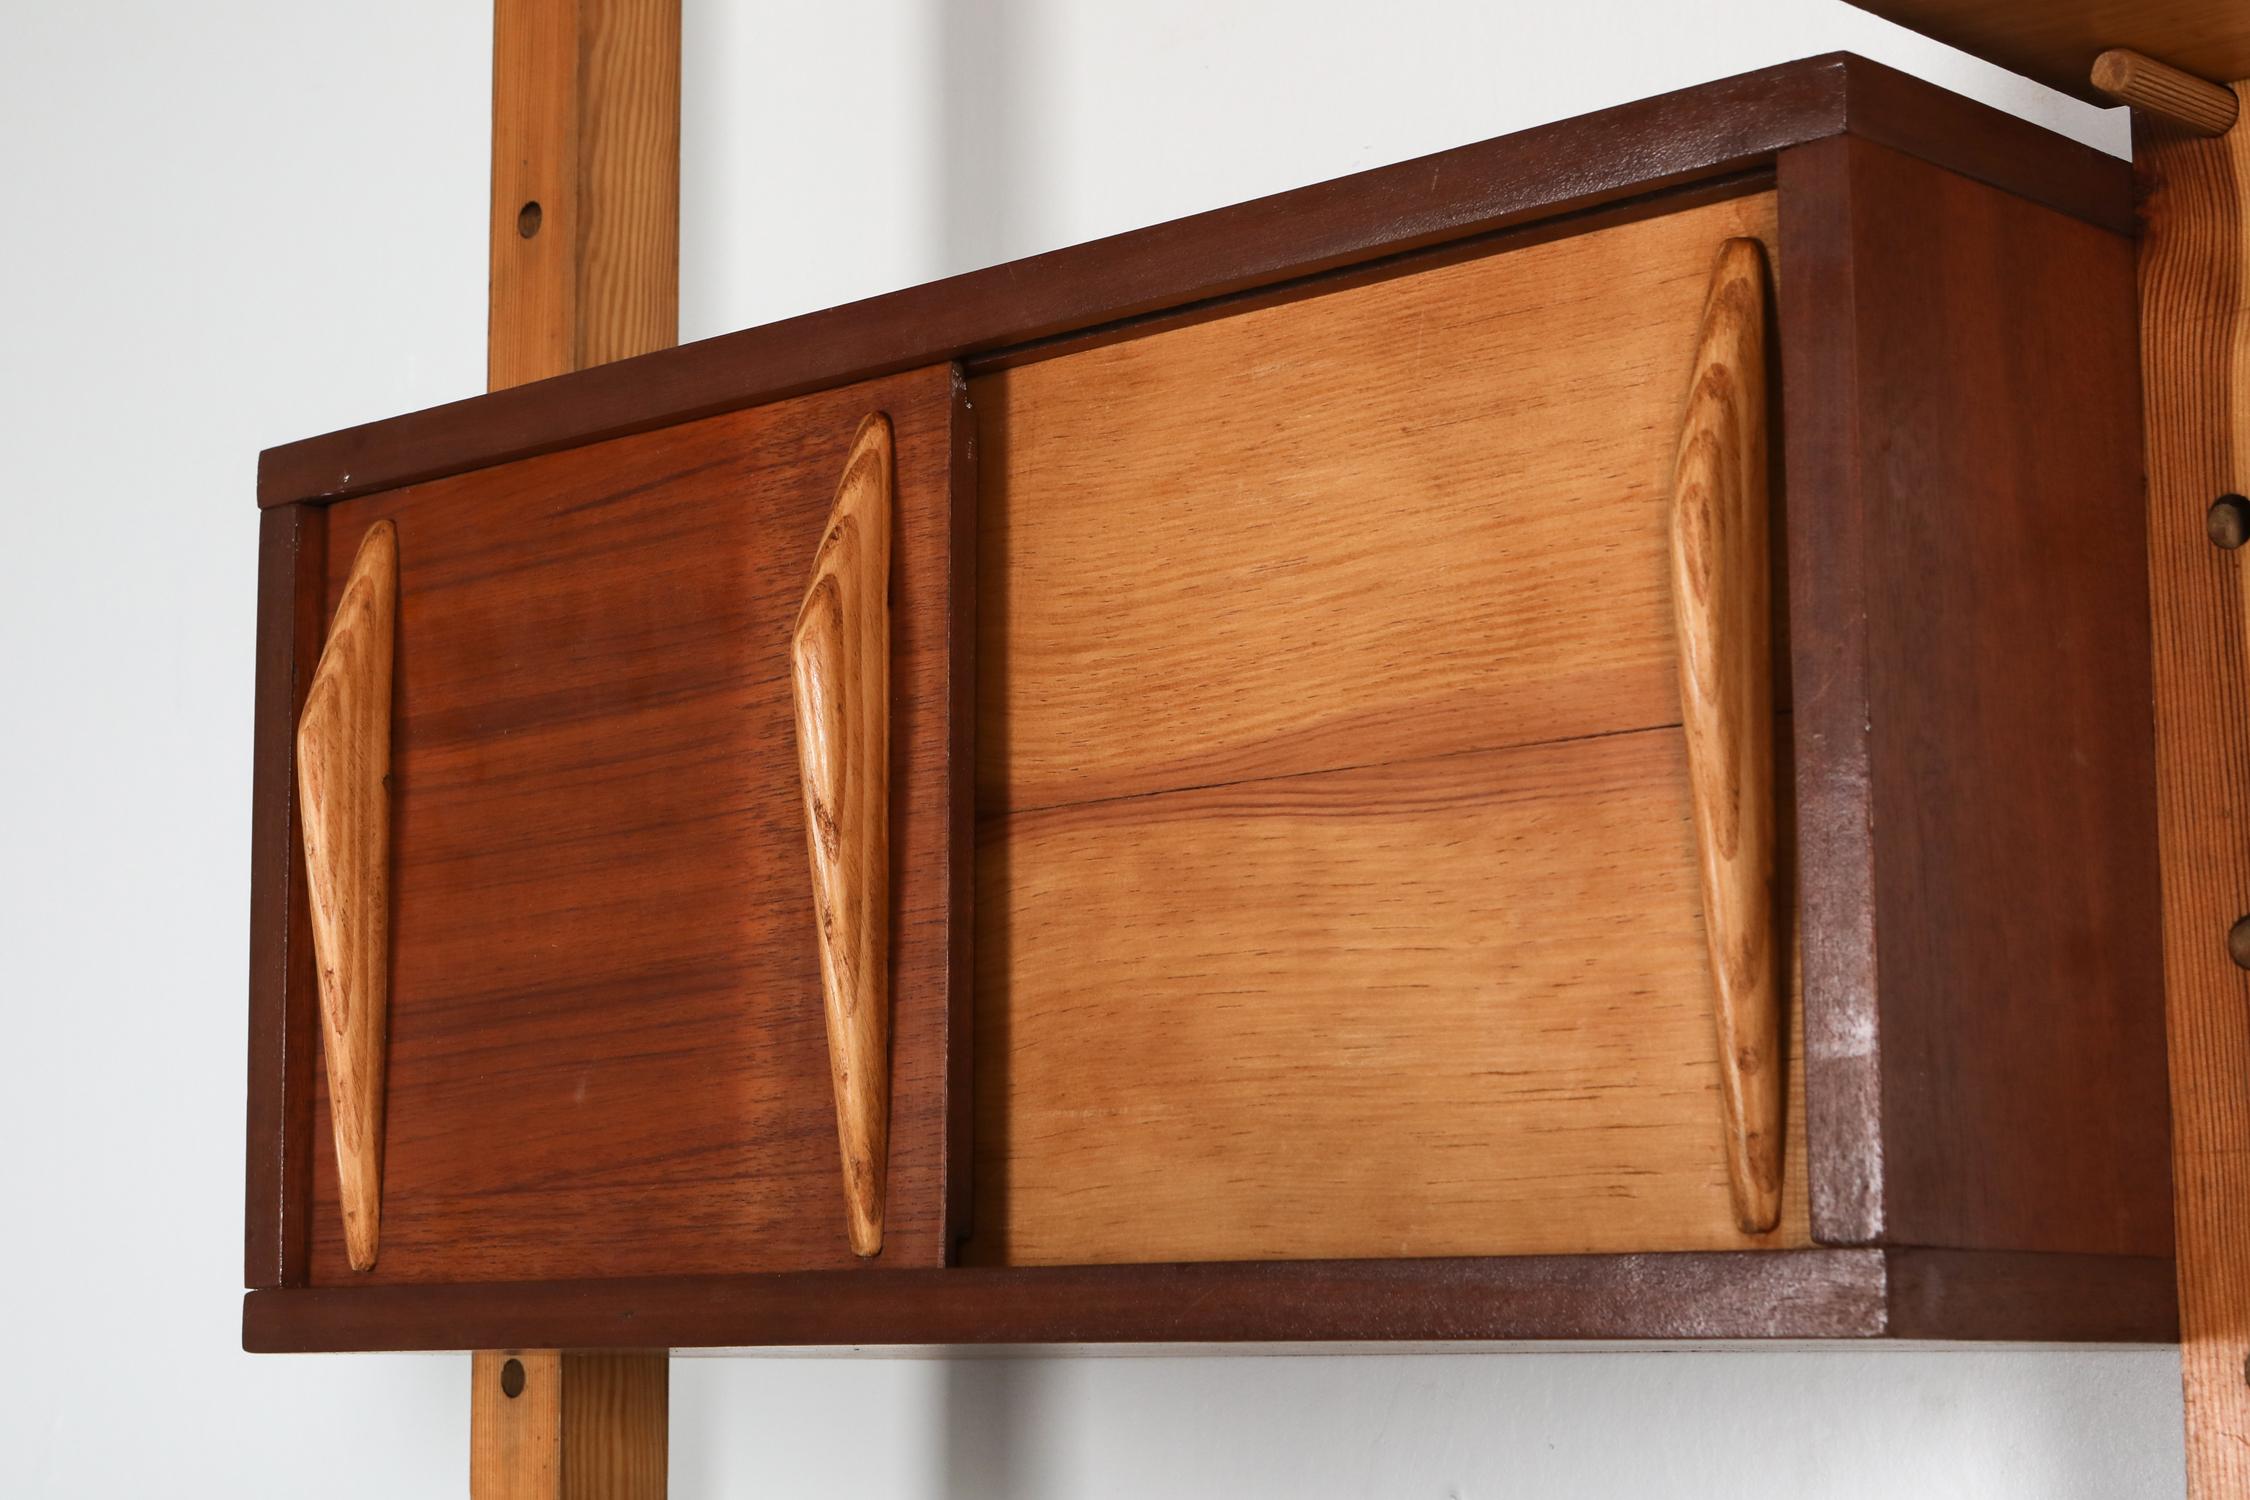 French Mid-Century Modern Shelve Unit in the Style of Perriand and Le Corbusier